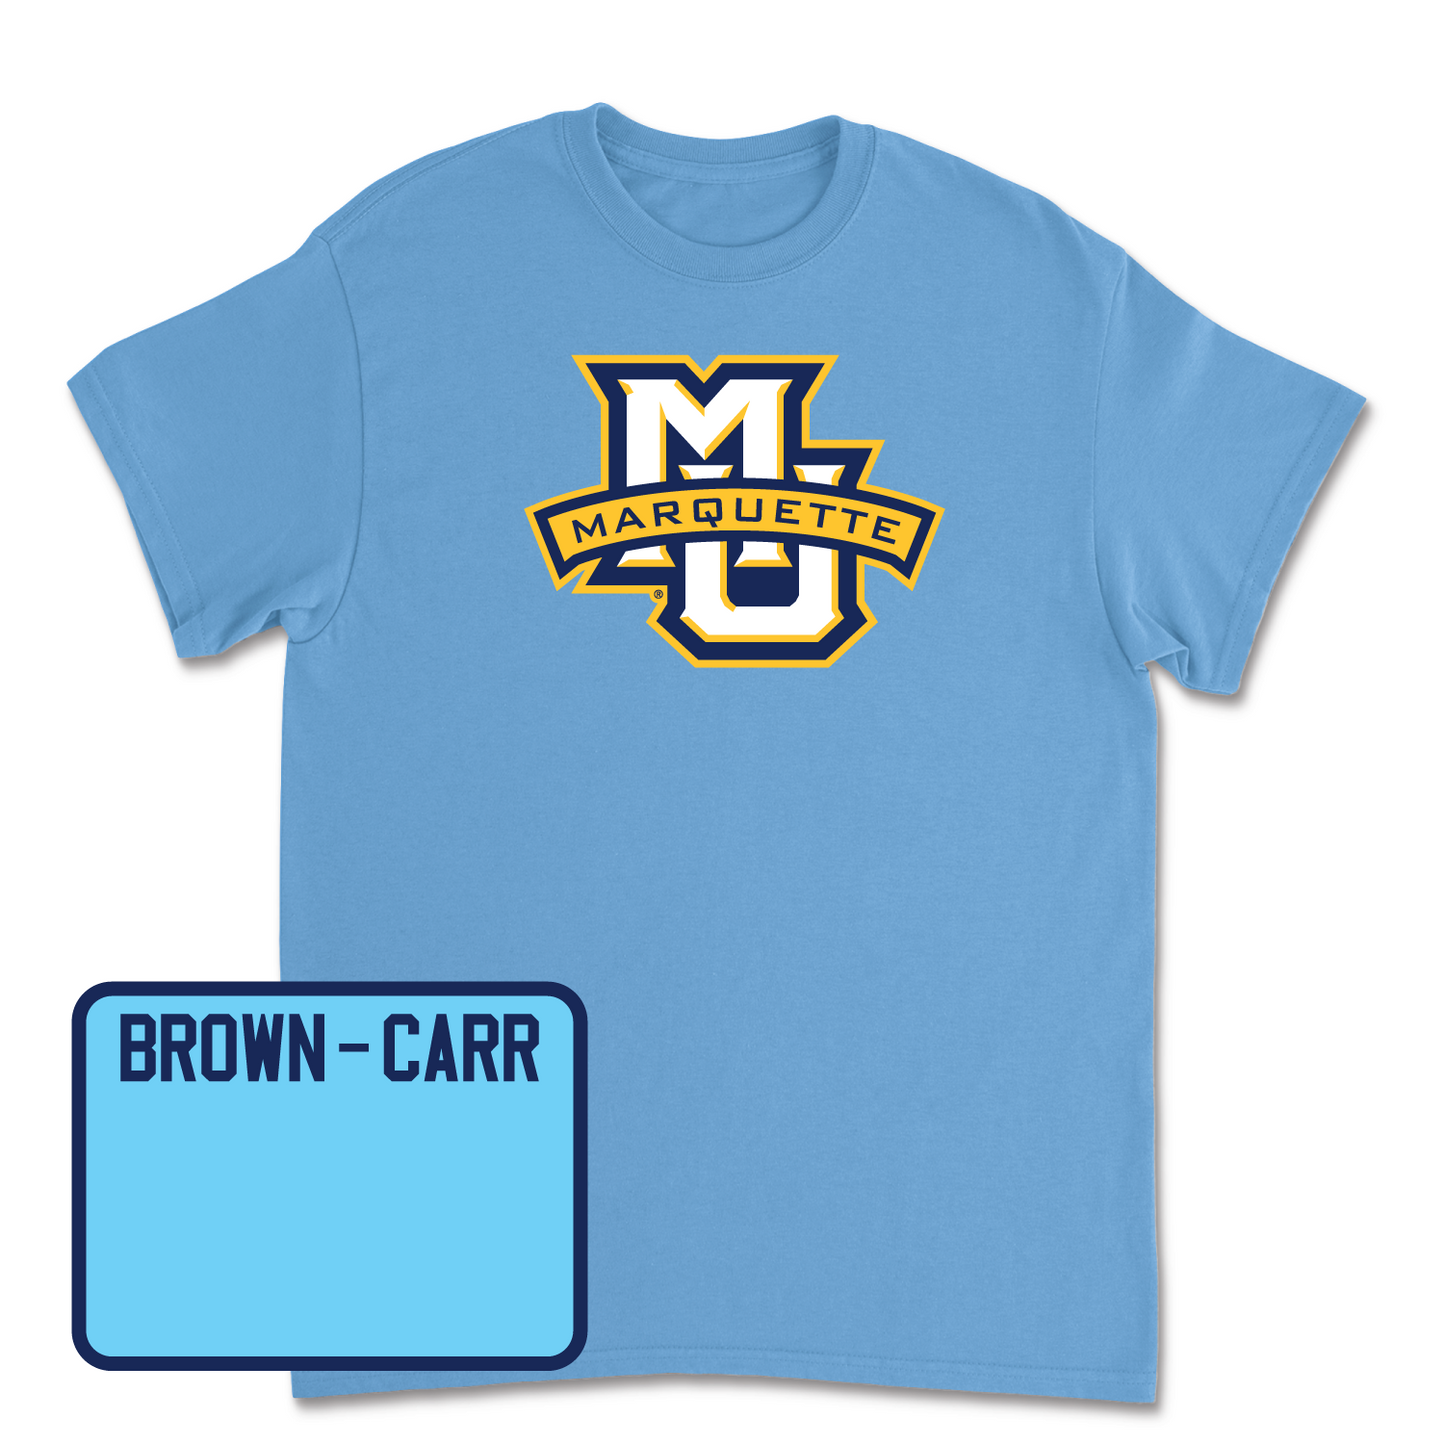 Championship Blue Track & Field Marquette Tee 2 4X-Large / Siani Brown-Carr